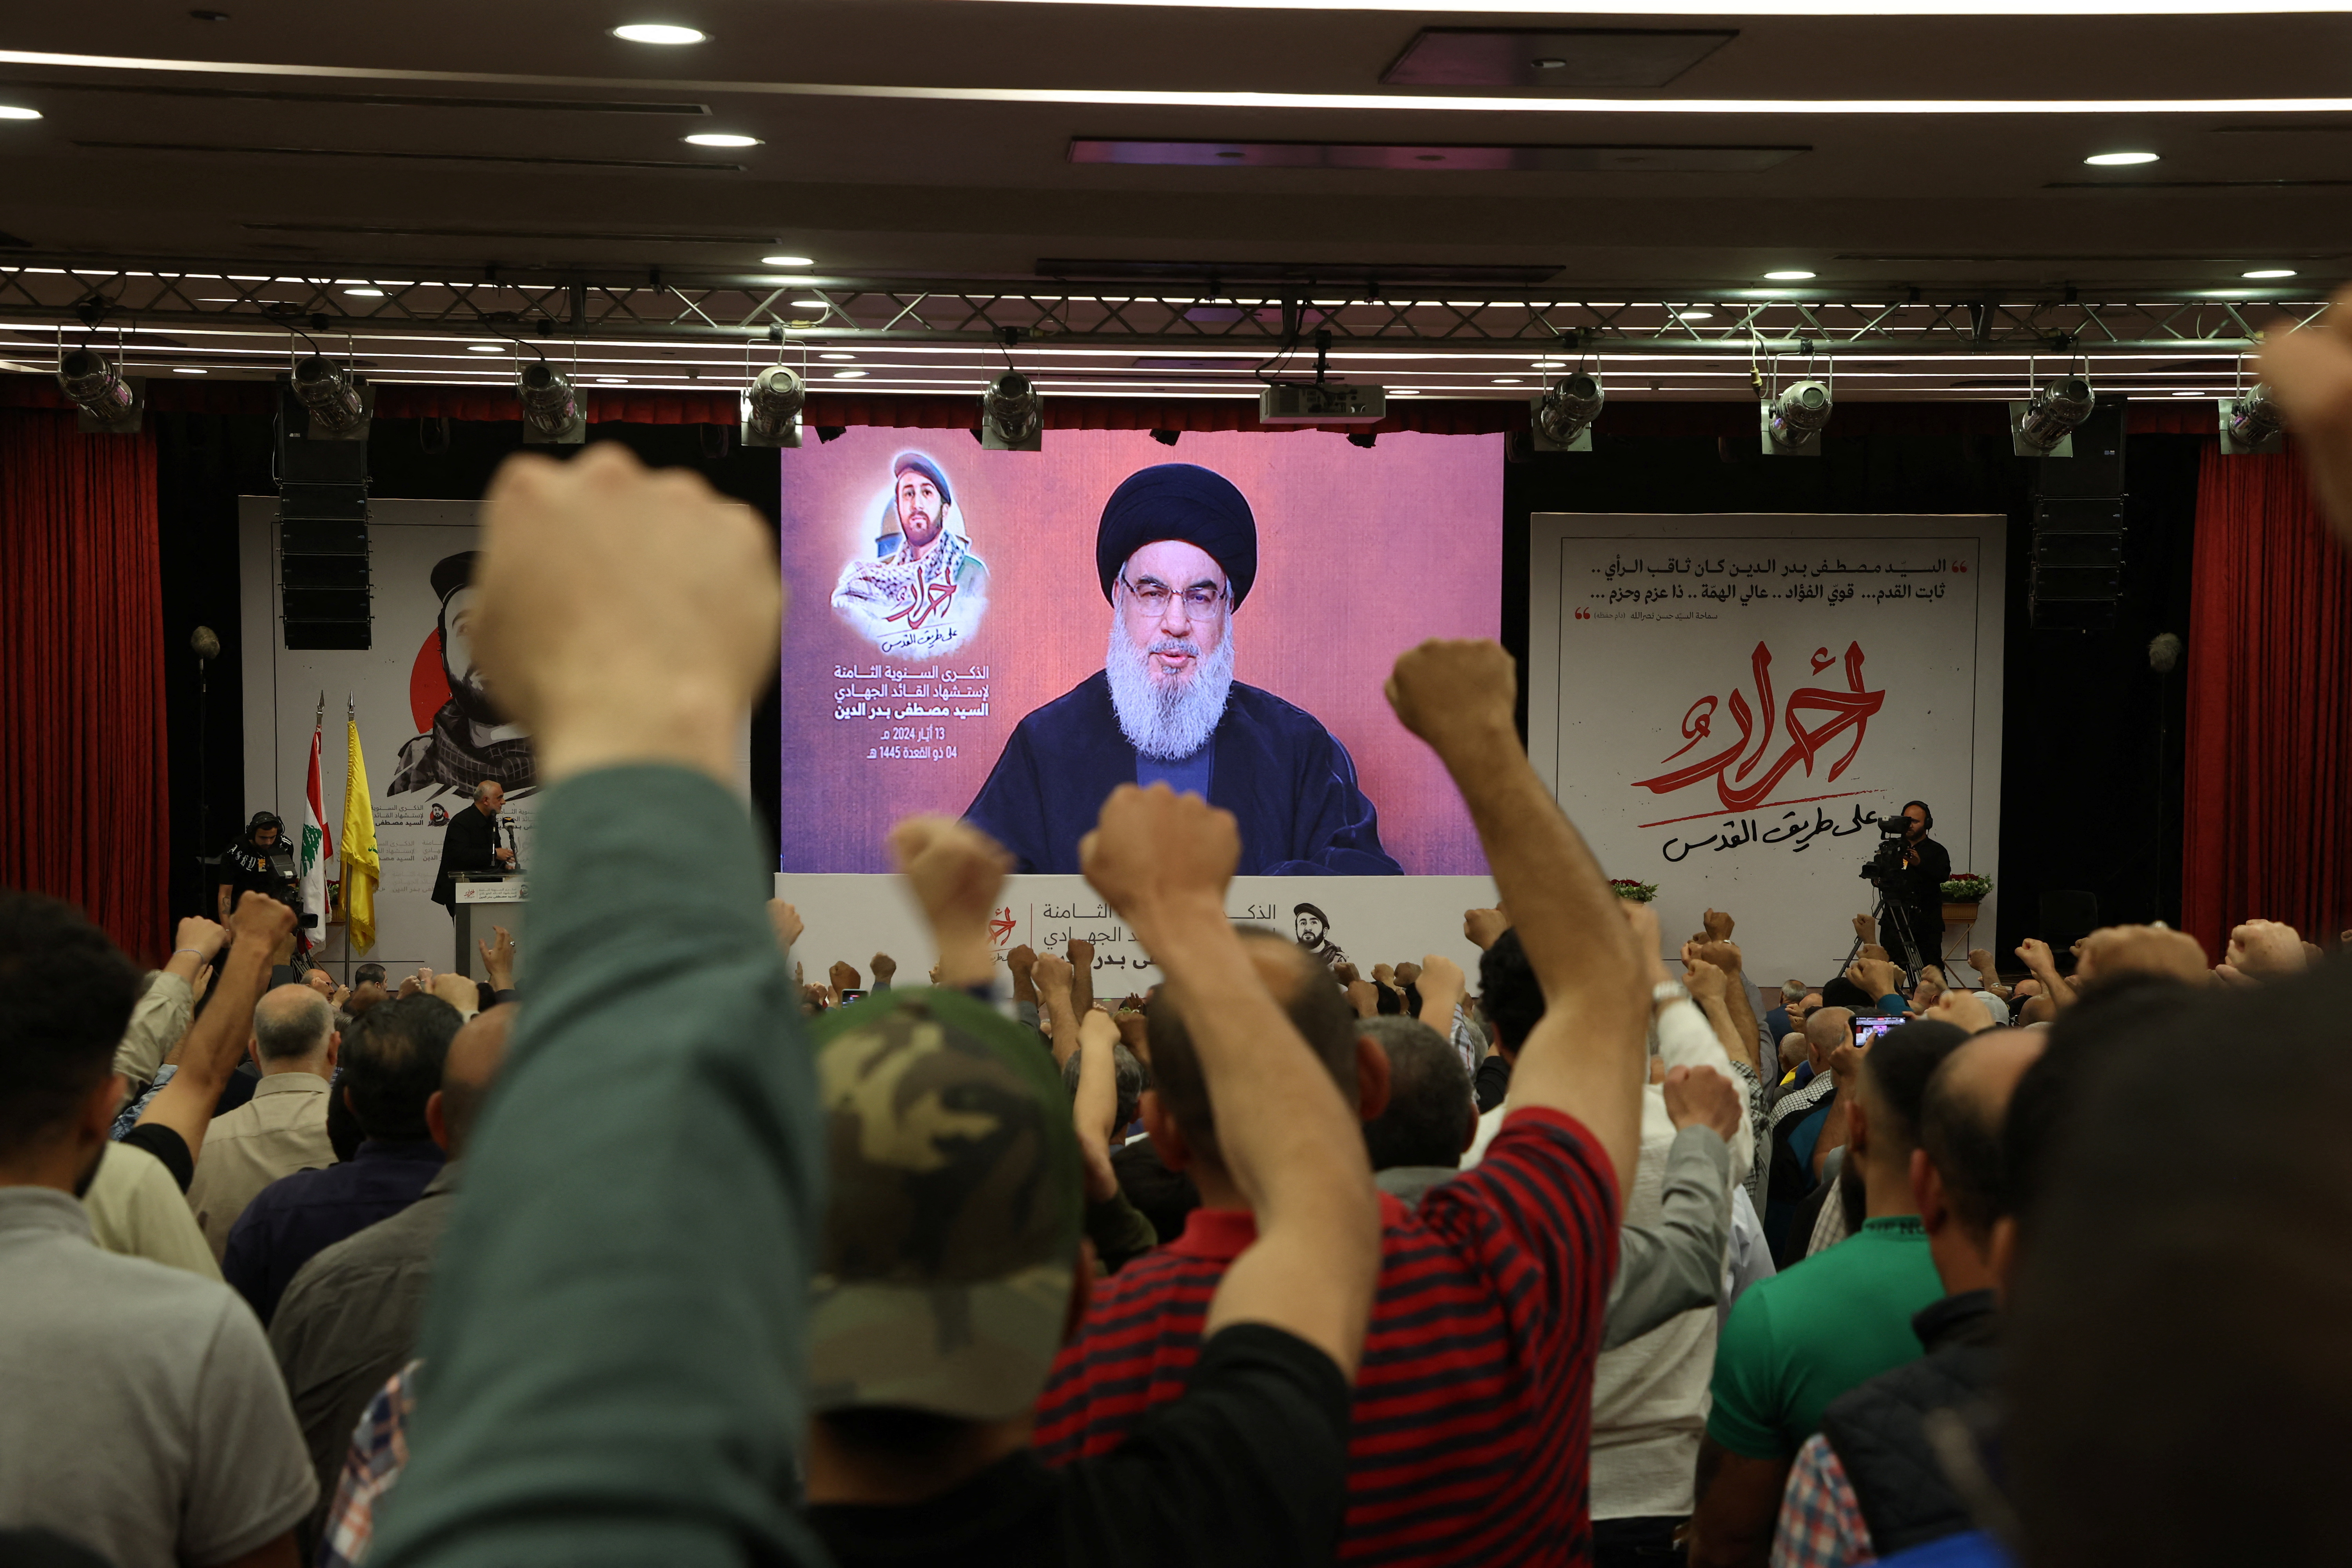 Supporters of Lebanon's Hezbollah leader Sayyed Hassan Nasrallah gesture as Narallah gives a televised address during a rally in Beirut's southern suburbs